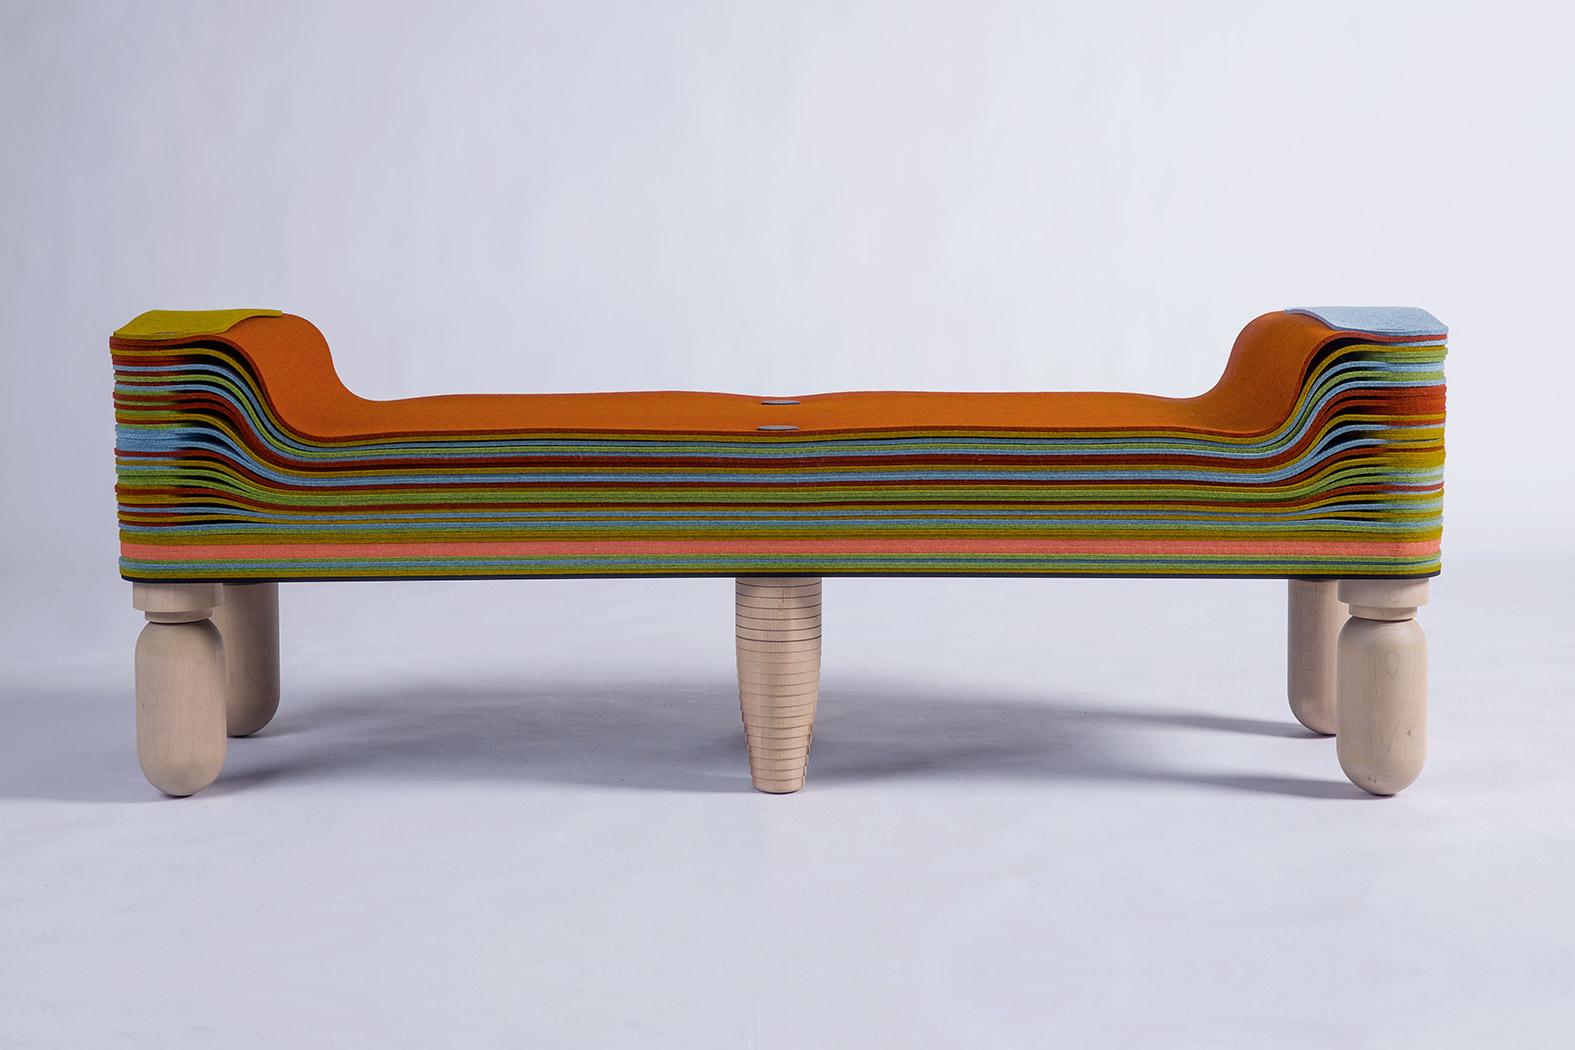 Contemporary Maxine C, Felt and Wood Bench, Benoist F. Drut in Stackabl, Canada 2021 For Sale